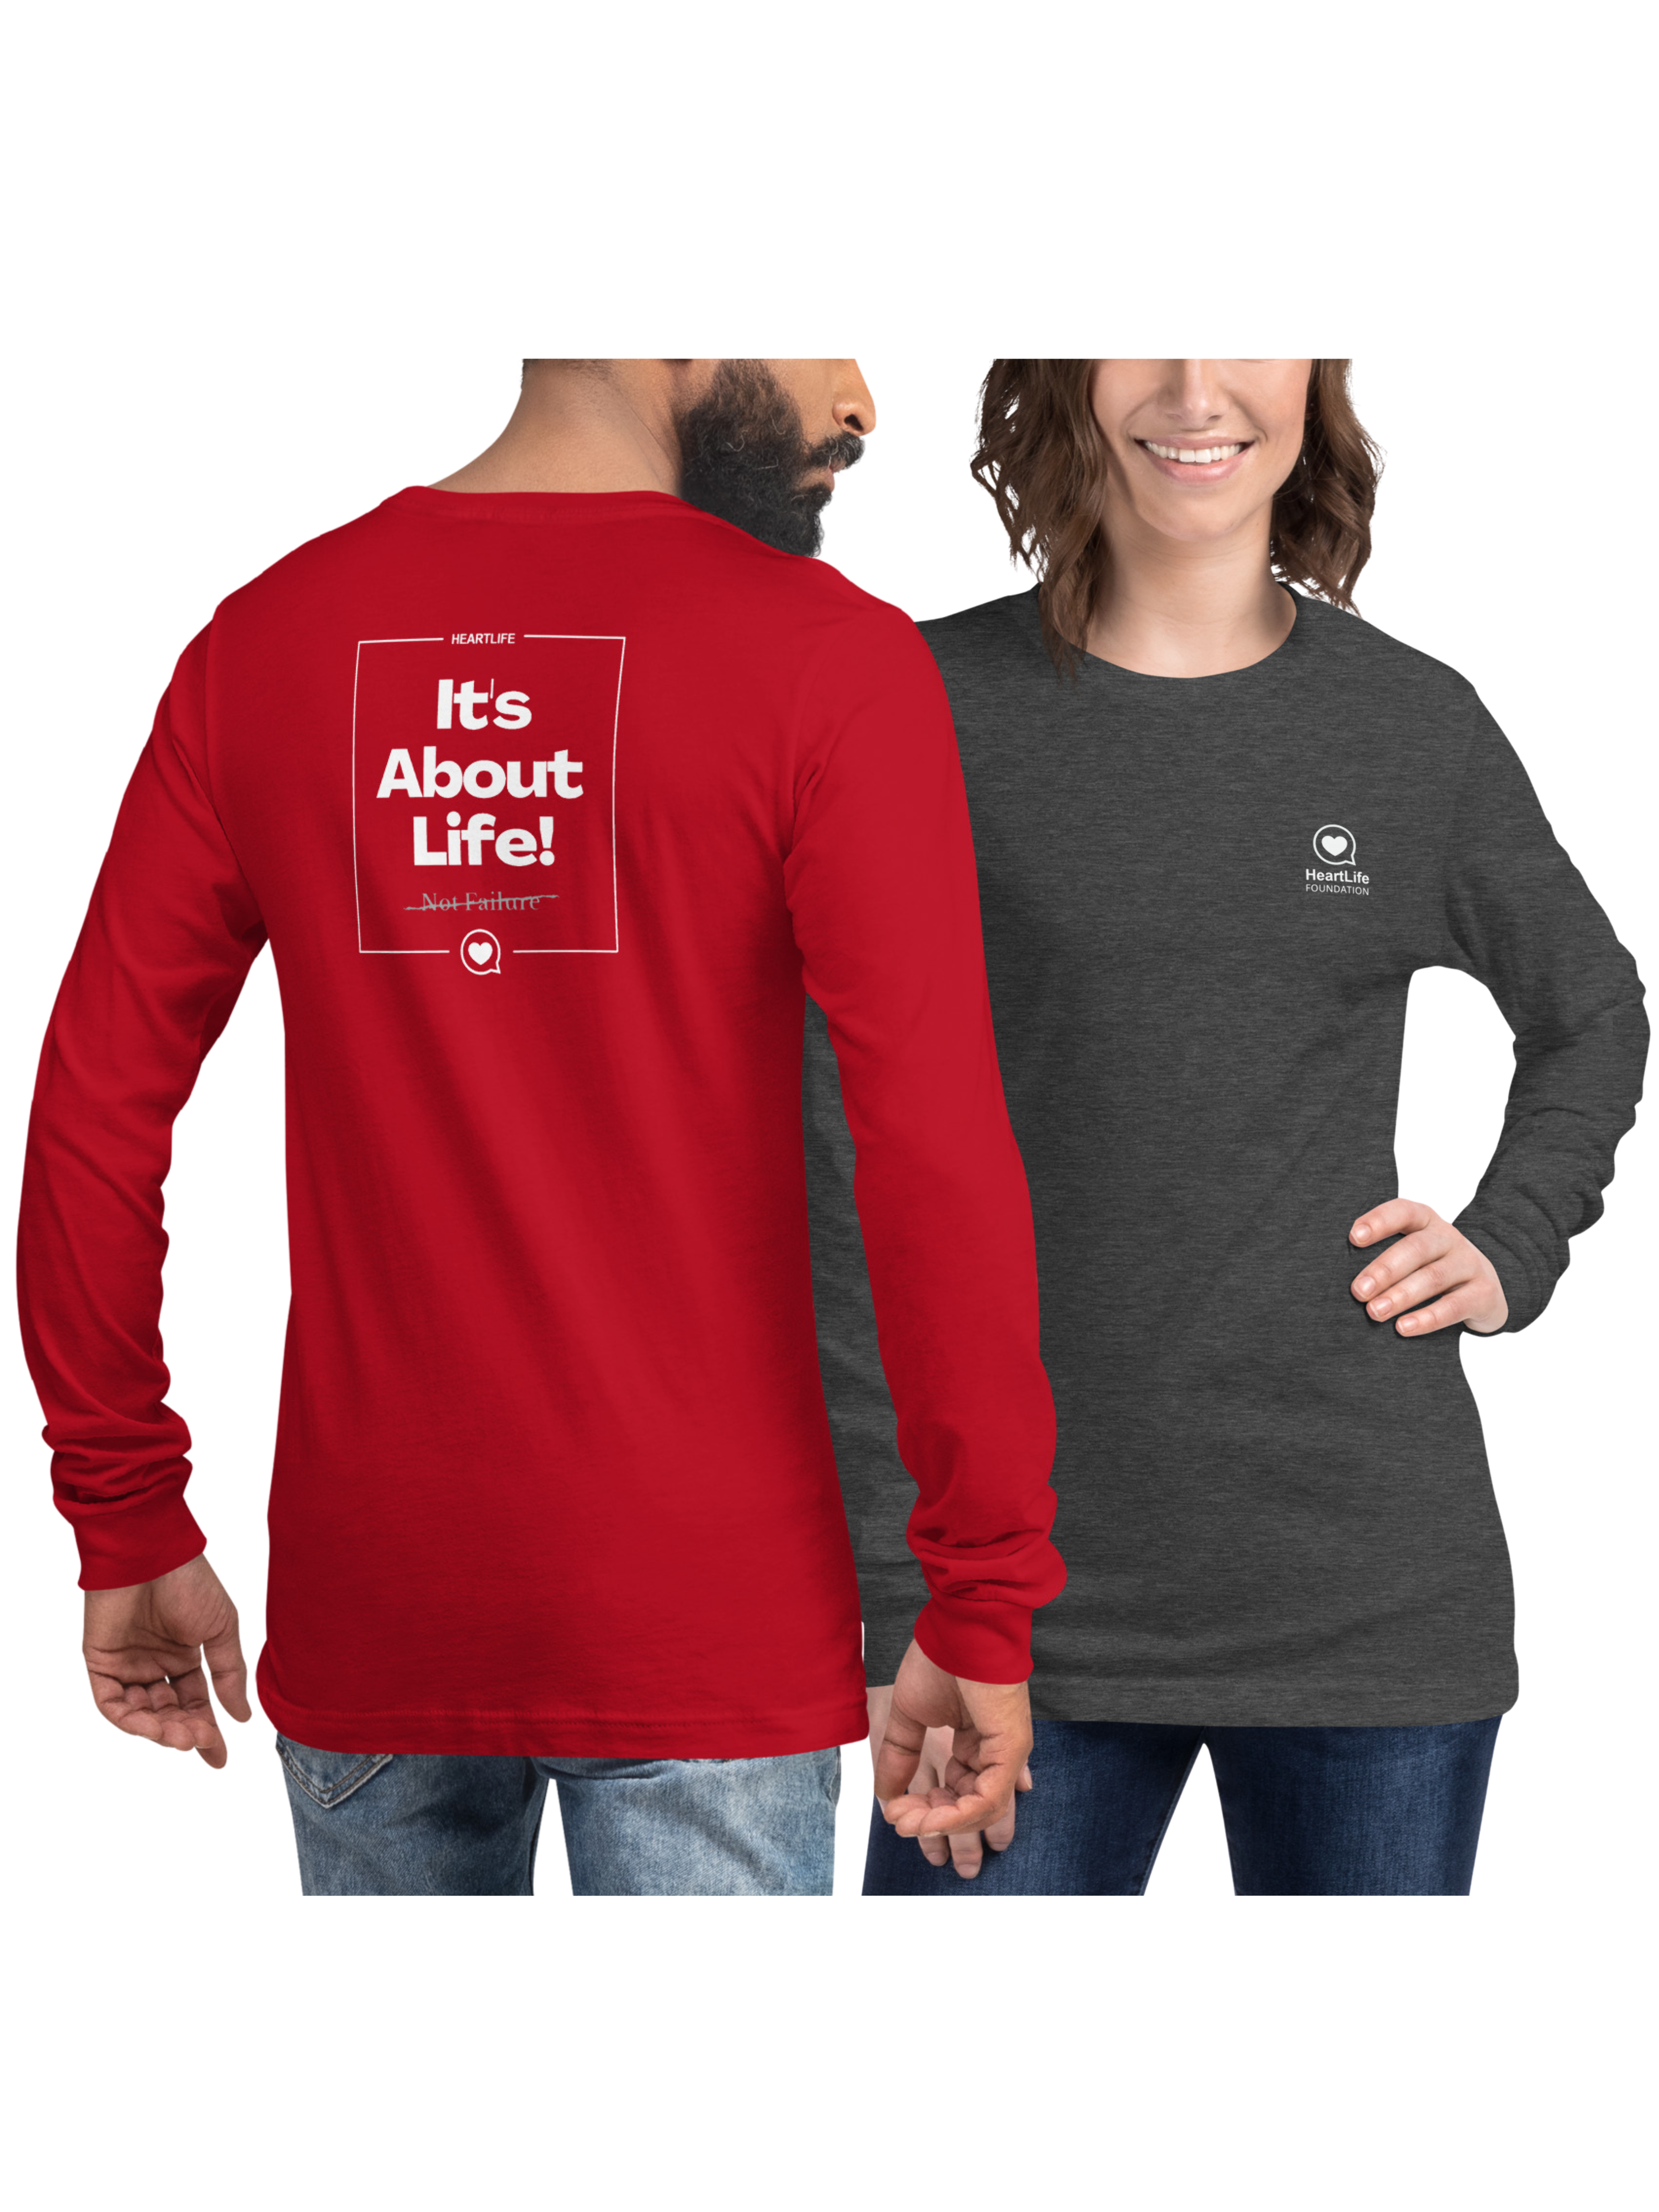 "It's About Life!" Unisex Long Sleeve Tee